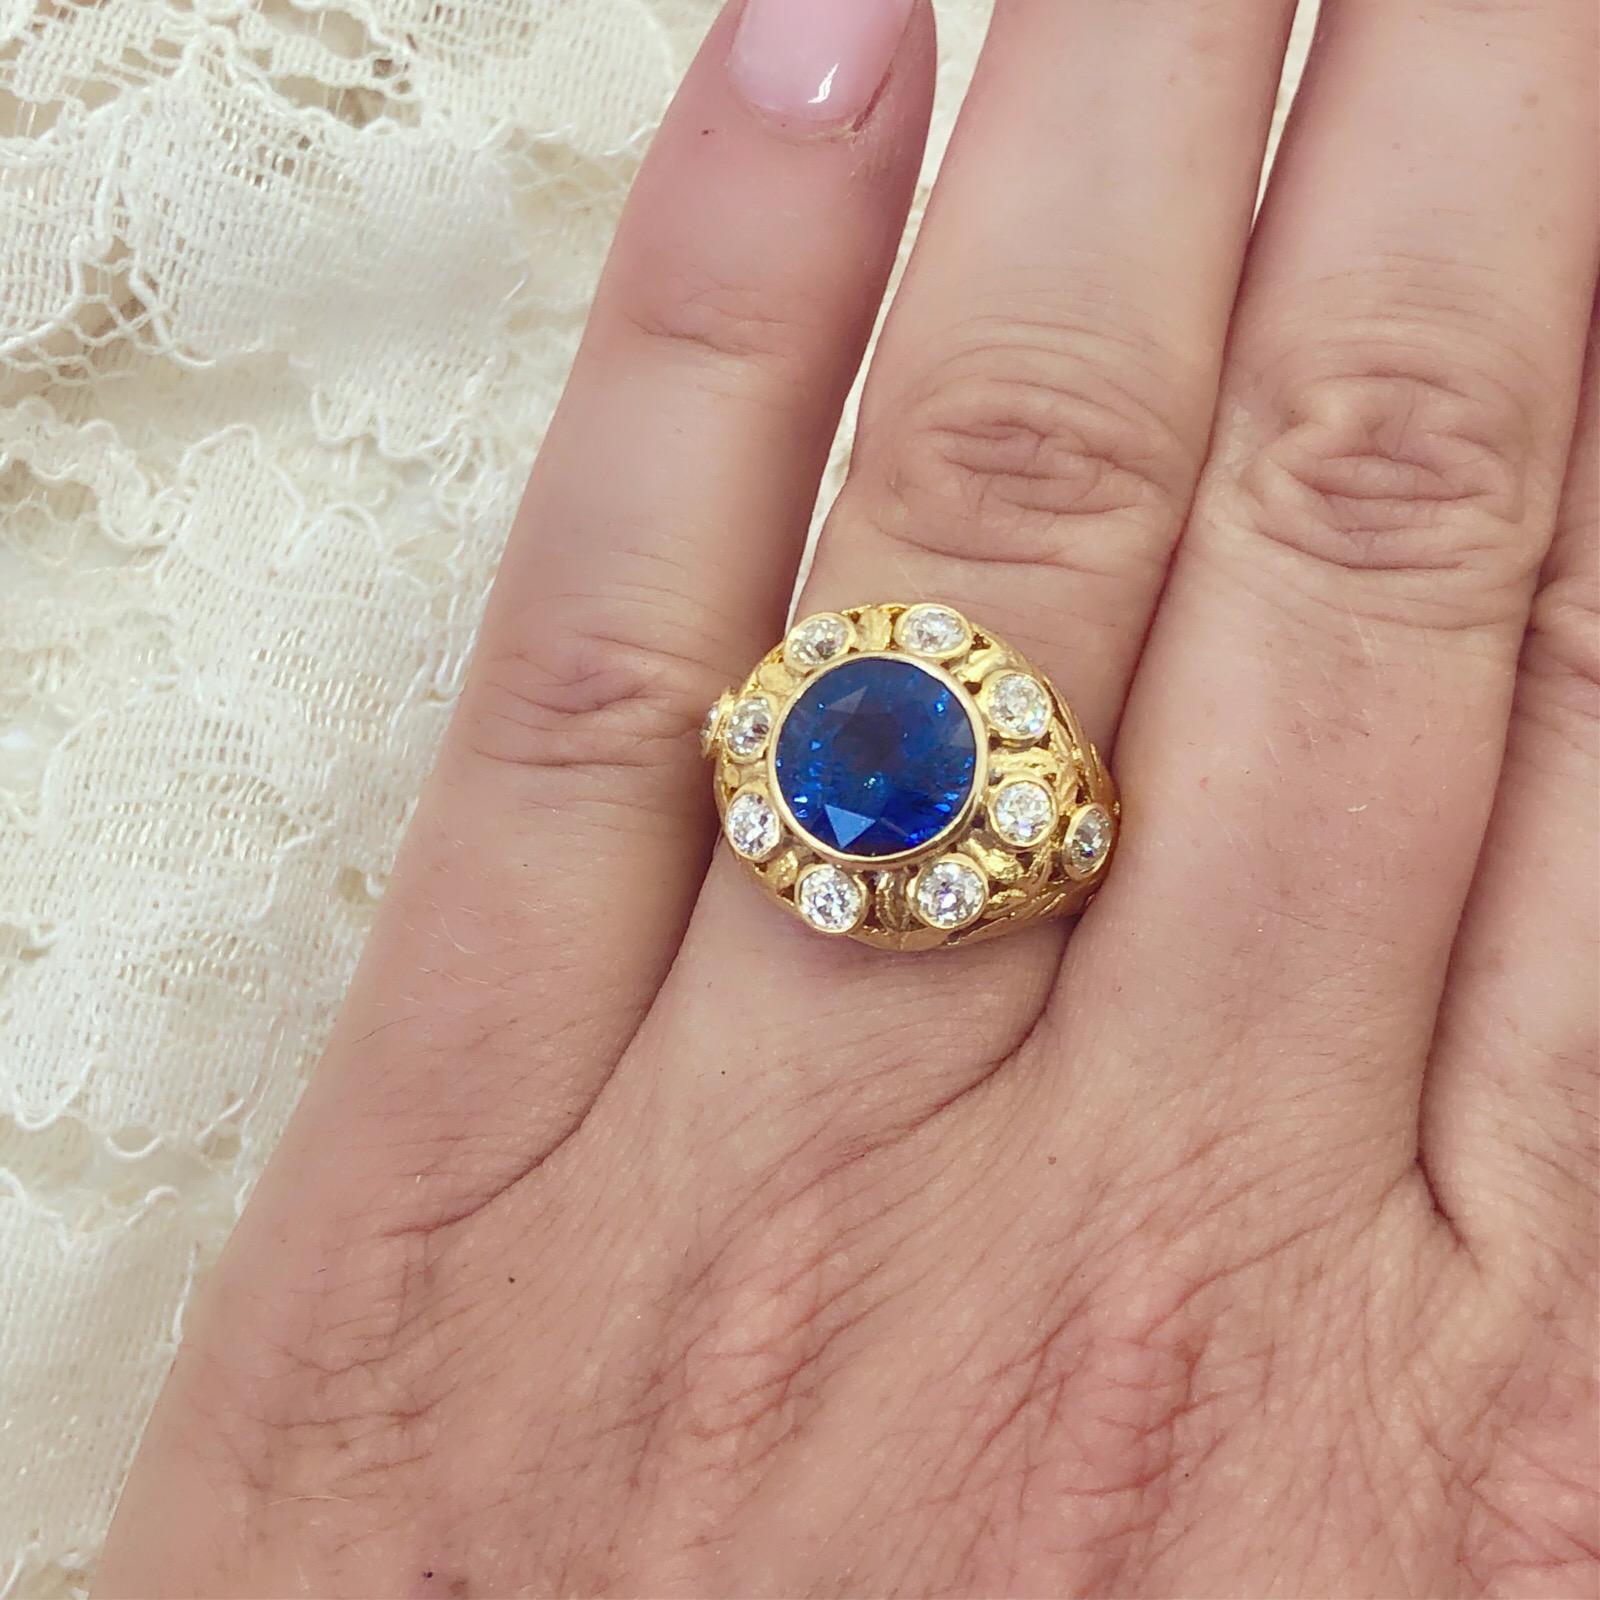 With antique design, this bold 18k yellow gold ring features a round Ceylon sapphire, weighing 4.76-cts, bezel-set and surrounded by 10 bezel-set old mine-cut diamonds, weighing together 0.74-ct. Weighing 7.5 grams and fitting a 7.25 finger size.